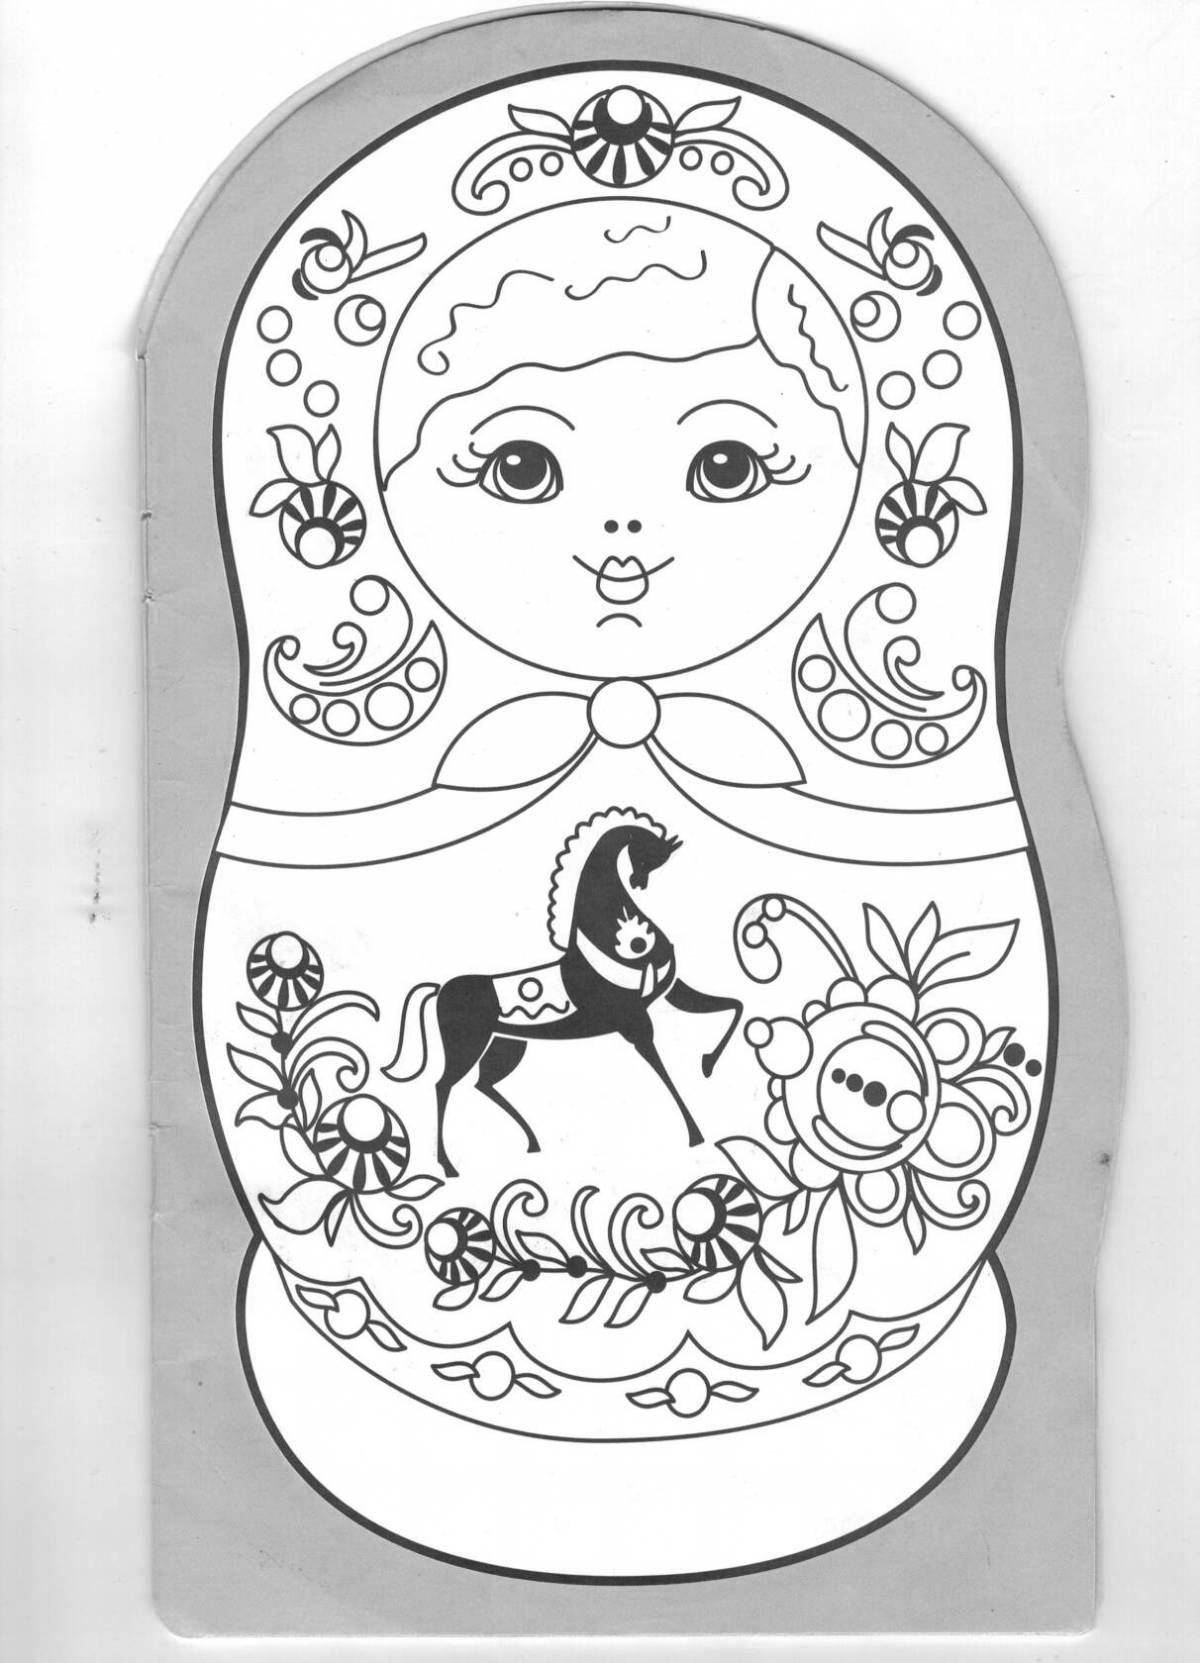 Coloring book playful Gorodets toy